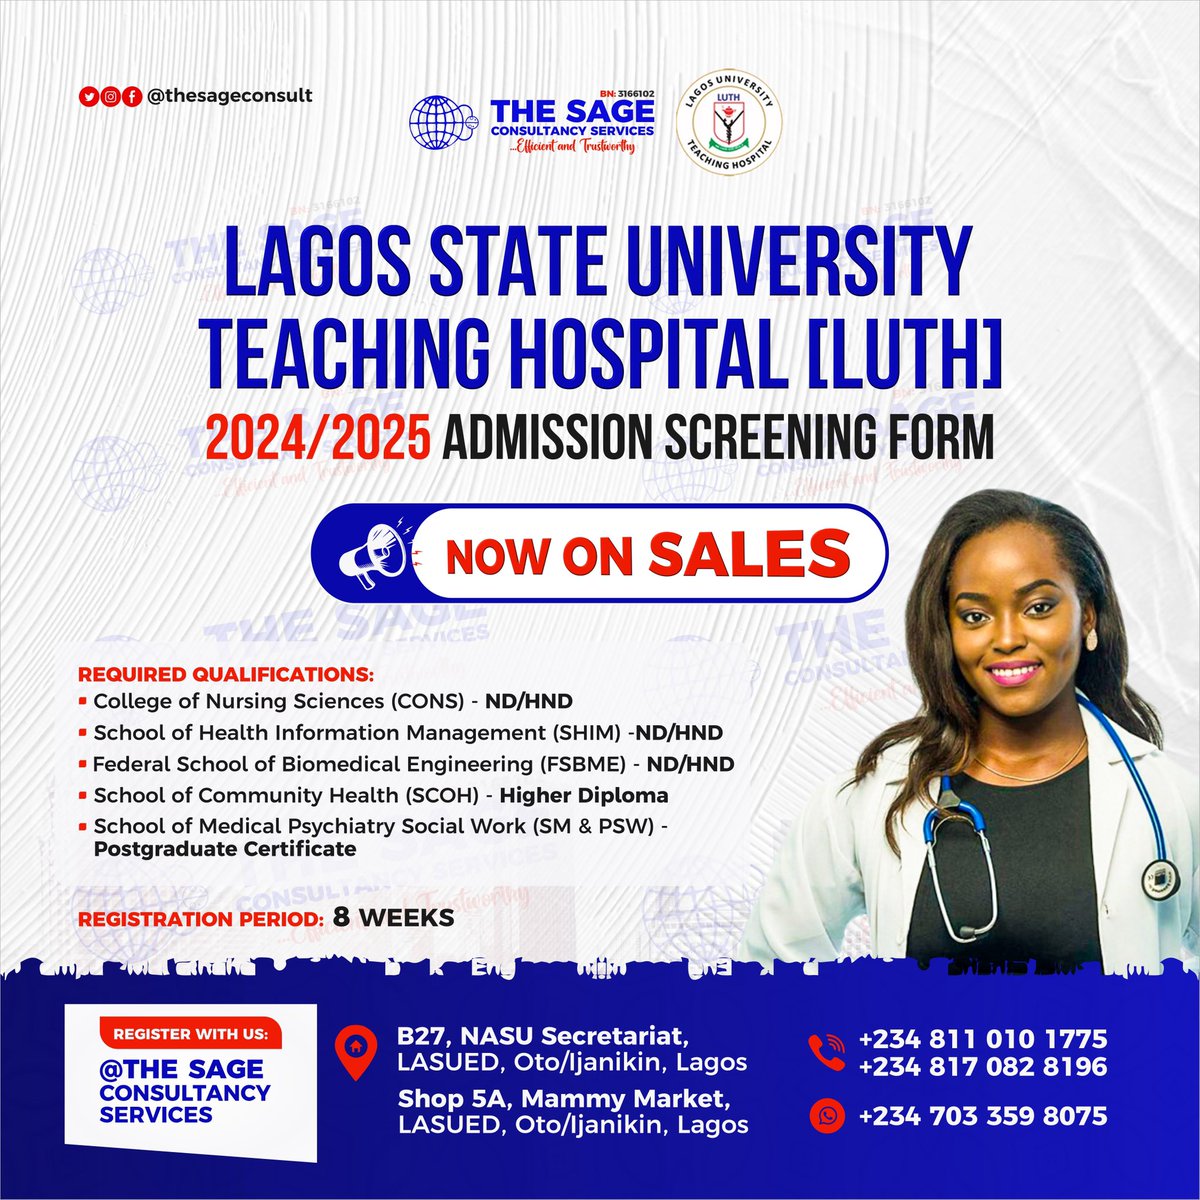 LAGOS STATE UNIVERSITY TEACHING HOSPITAL ADMISSION FORM IS OUT

Interested Candidates should click on the link in our bio or Chat via WhatsApp at +2347033598075 to communicate with us, to get your registration done.

#OYINBO
#THESAGECONSULTANCYSERVICES 
#DISTANCEISNOTABARRIER